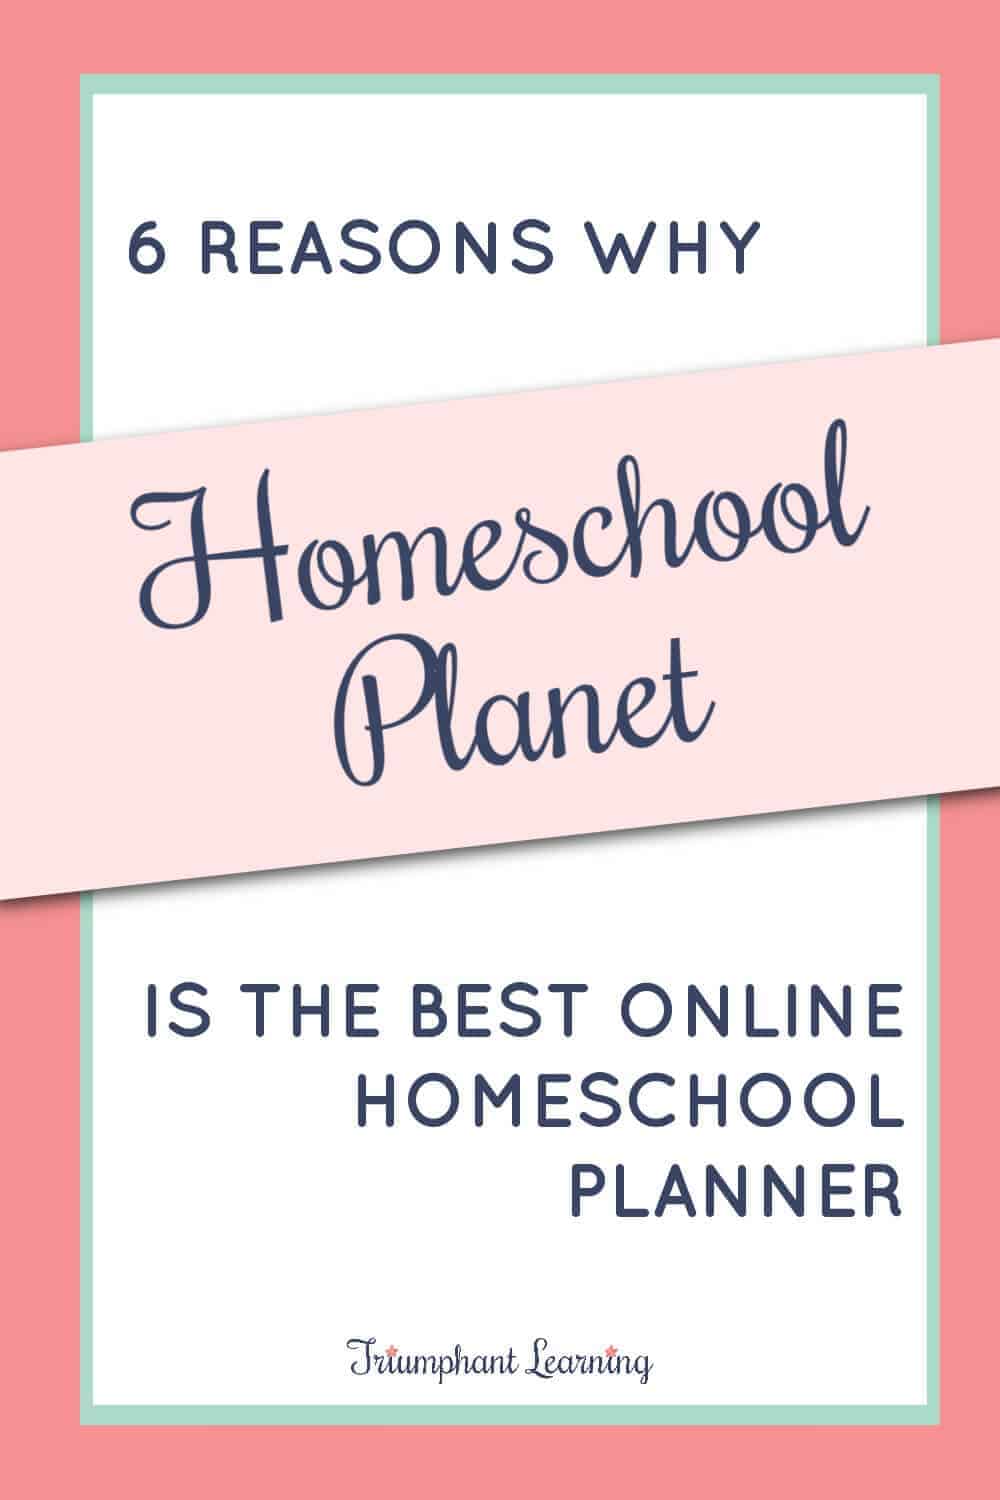 Homeschool Planet exceeded my demanding expectations. Find out why it is the best online homeschool planner. Plus watch a video review. via @TriLearning